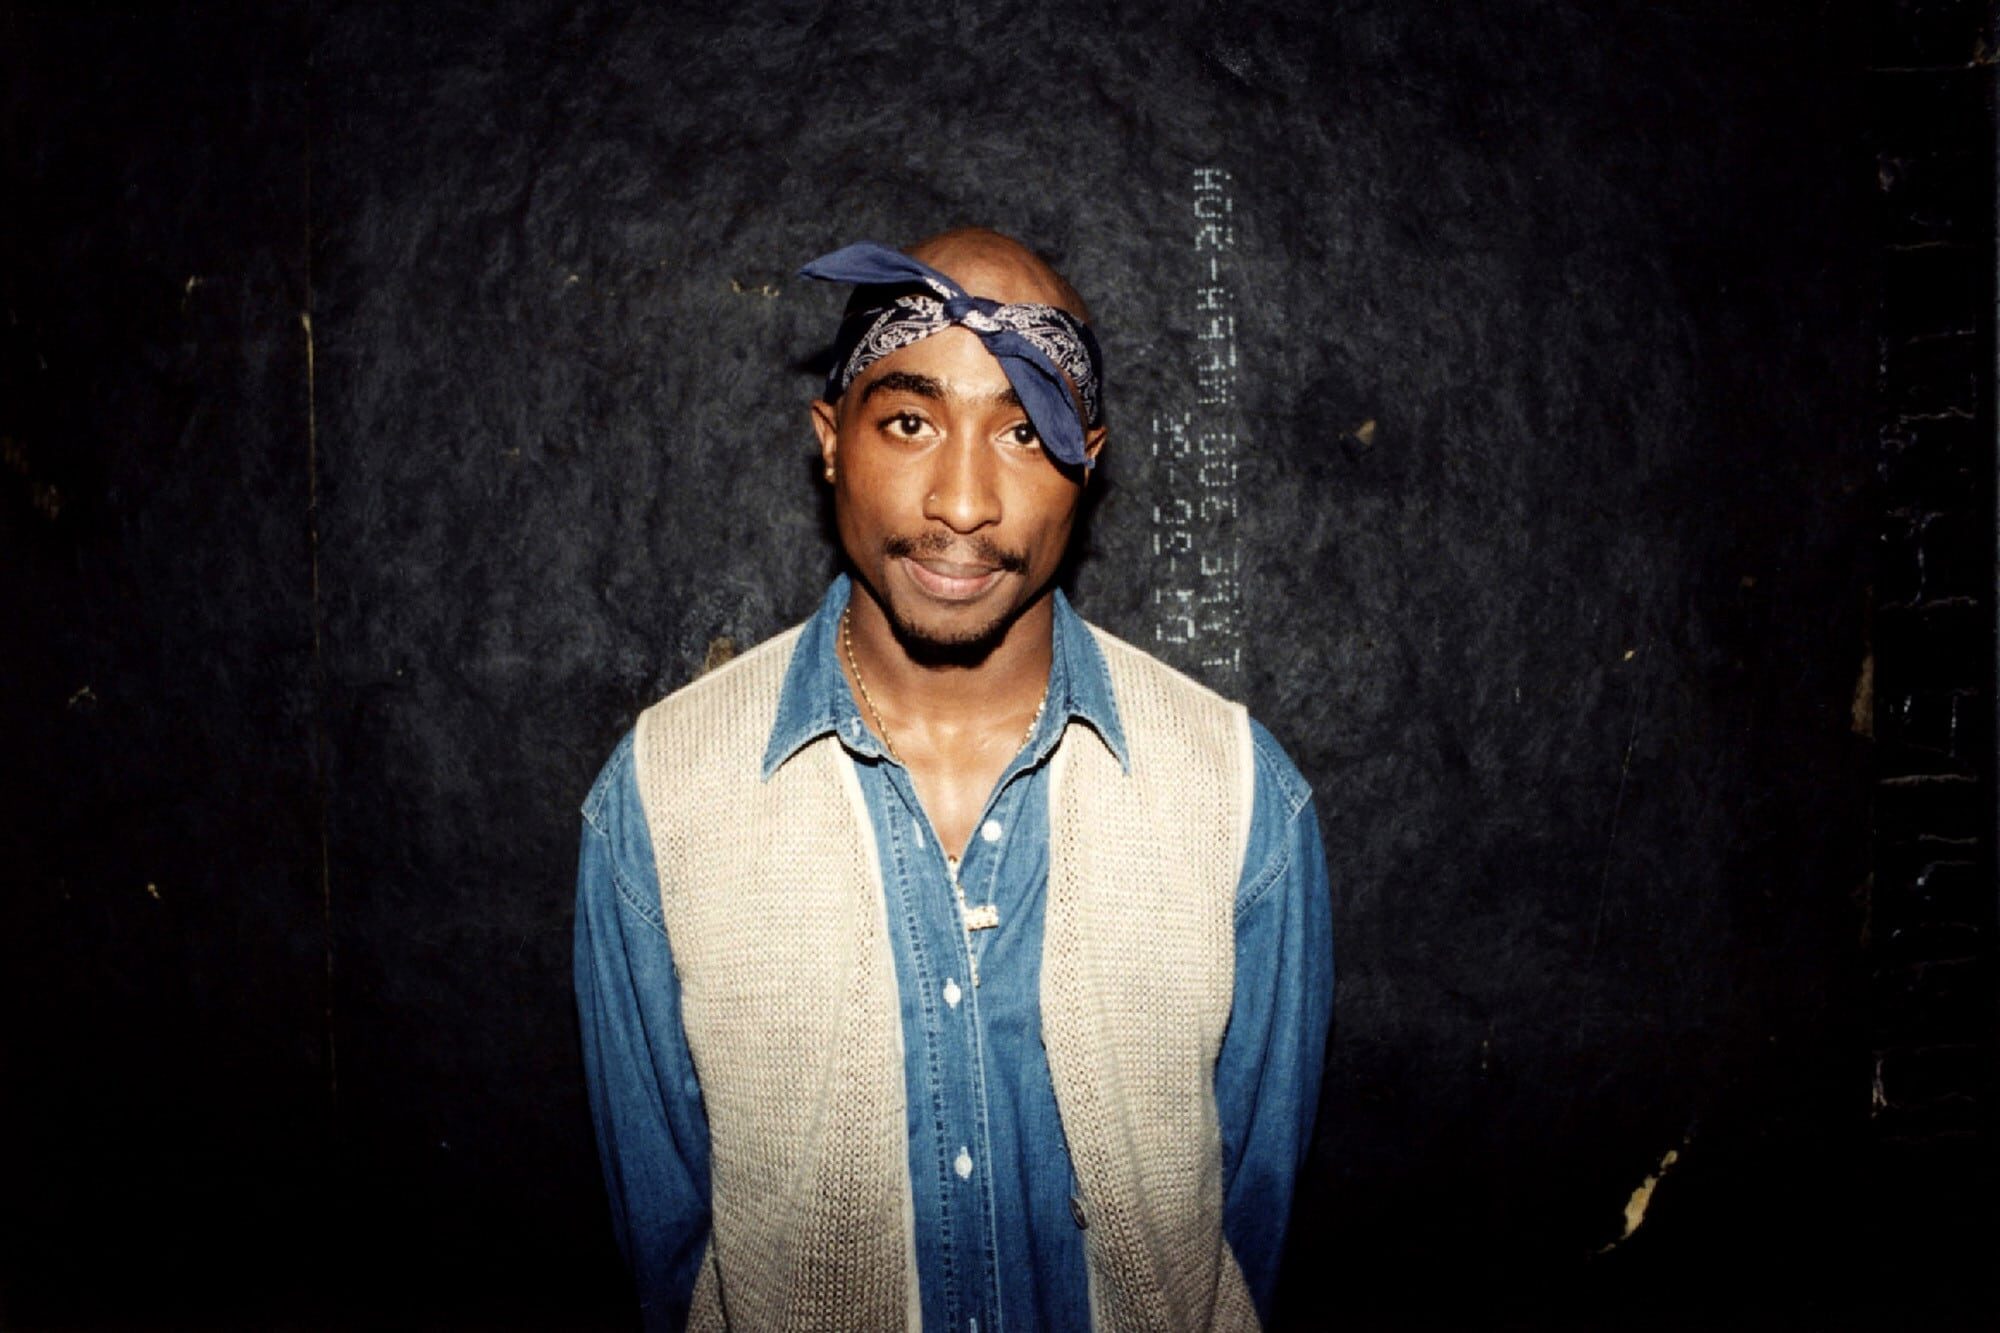 Rapper Tupac Shakur after his performance at the Regal Theater in Chicago, in March 1994